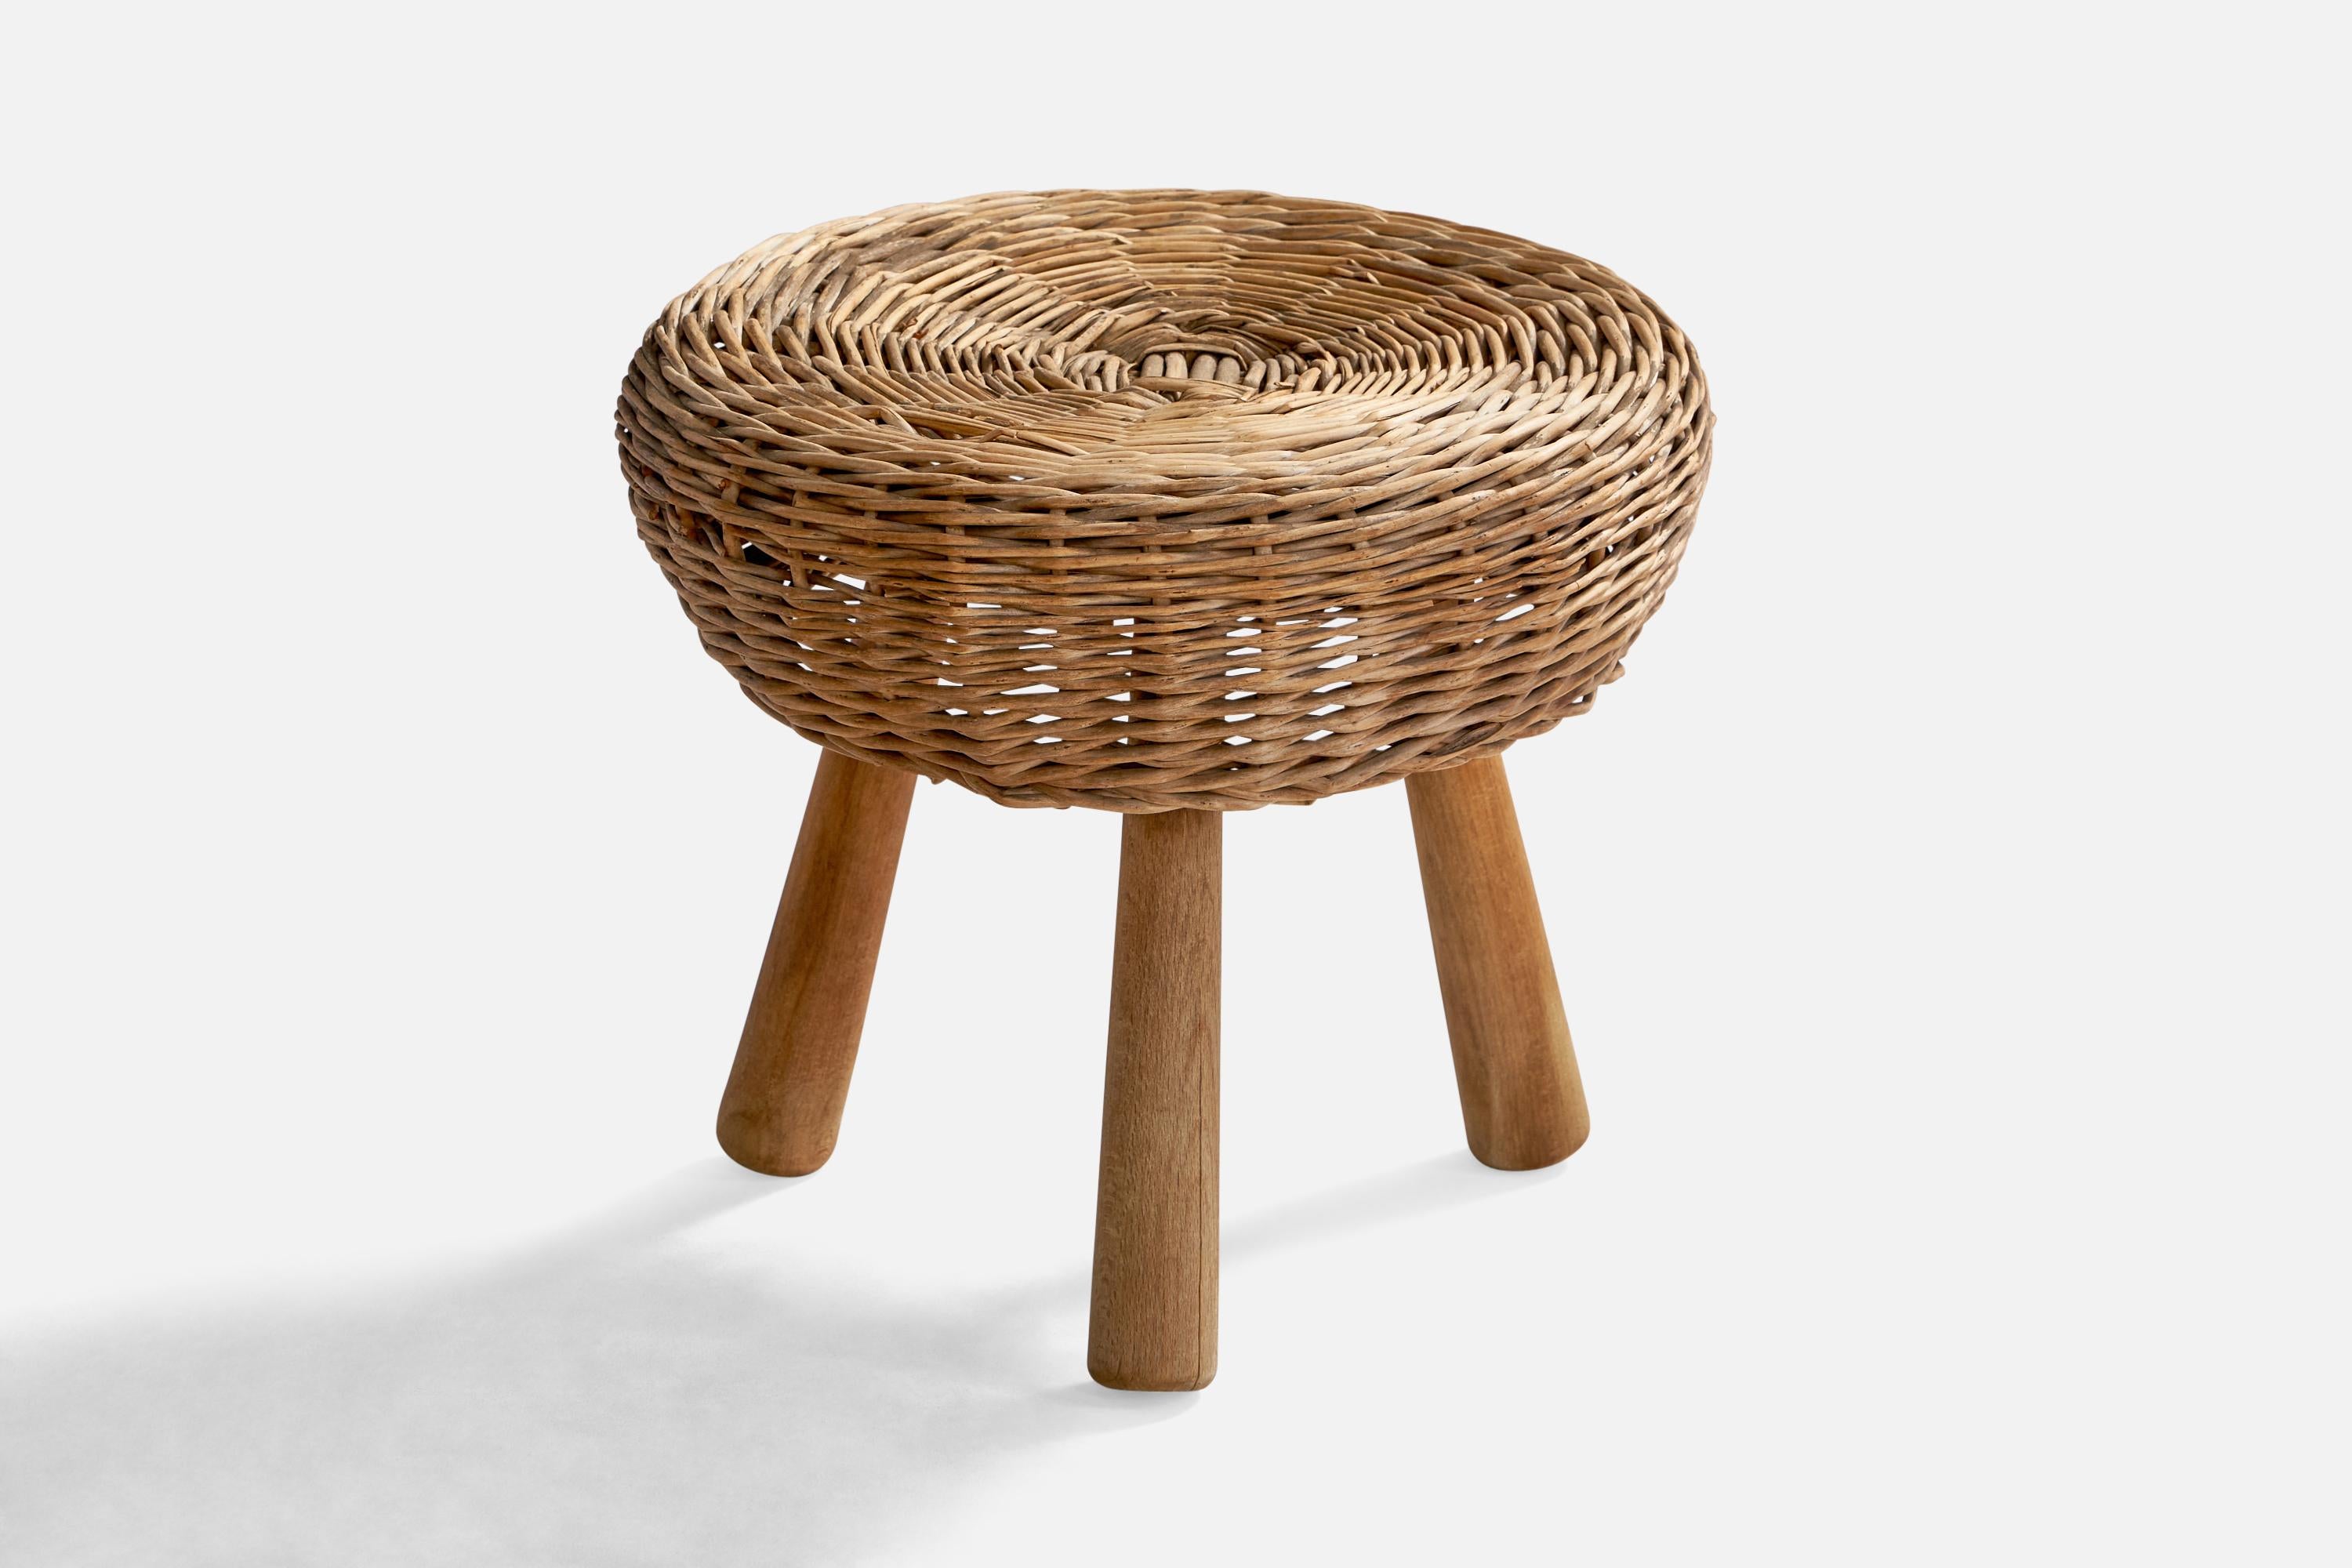 A woven rattan and wood stool designed and produced by Tony Paul, USA, 1960s.